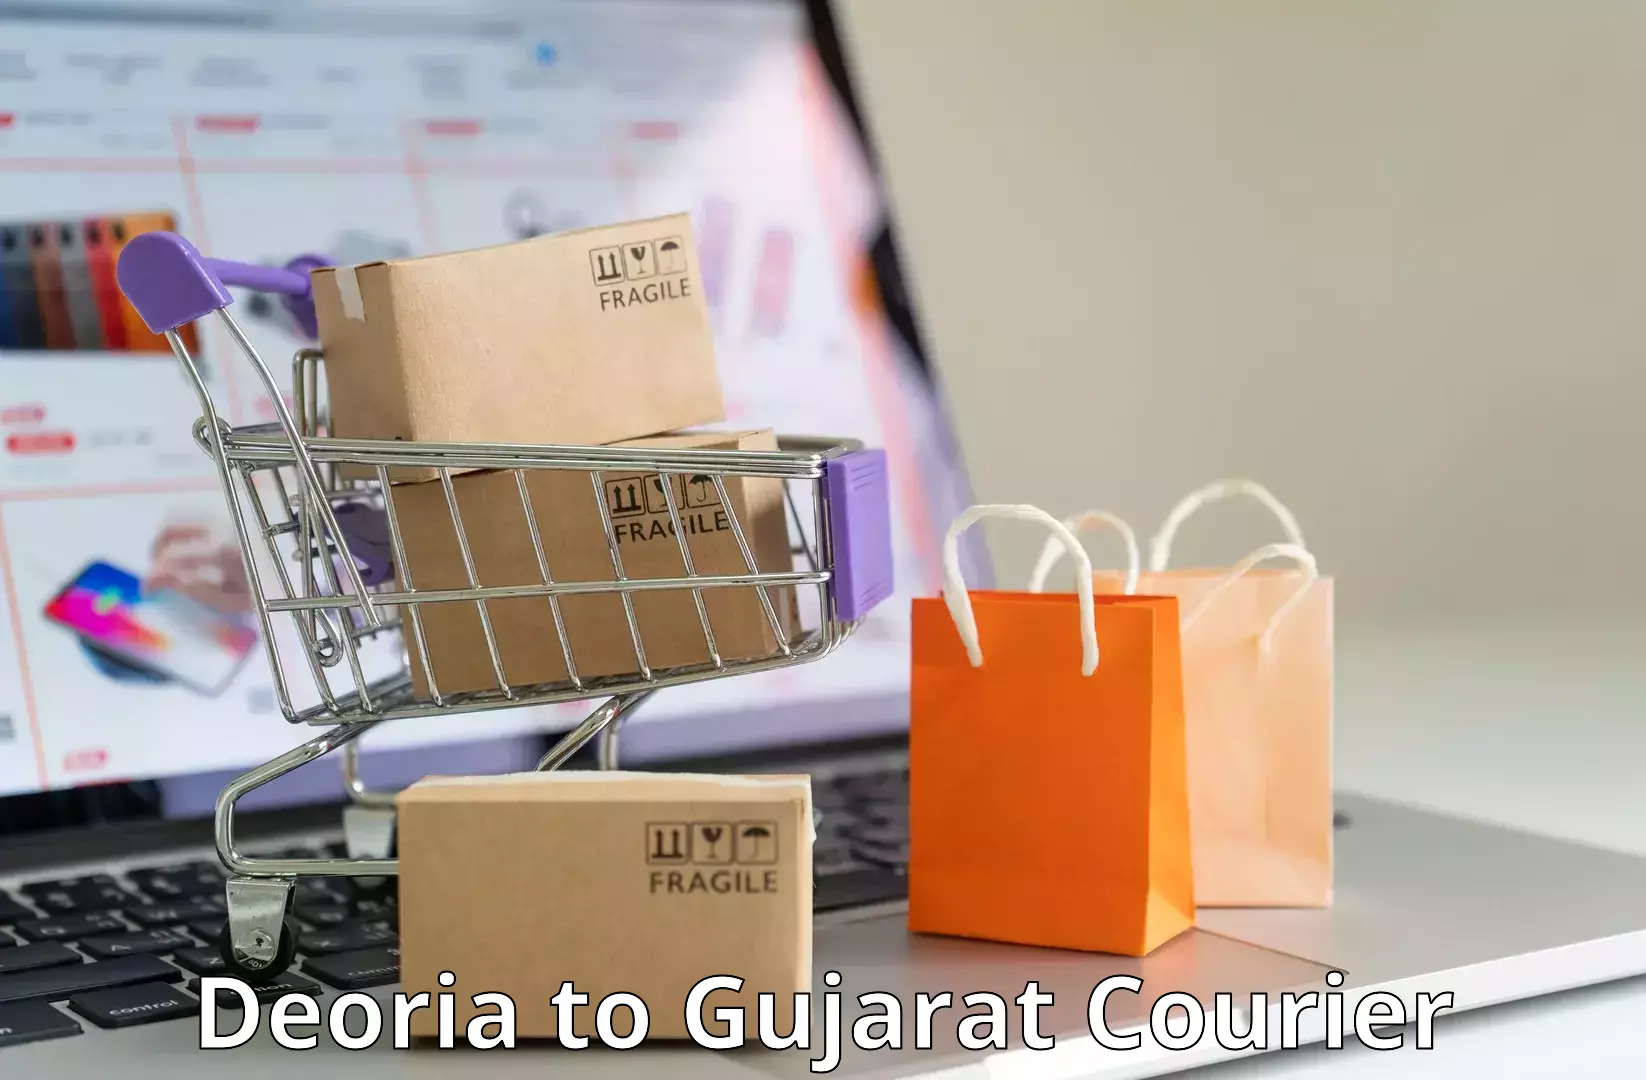 High-capacity shipping options Deoria to Surat